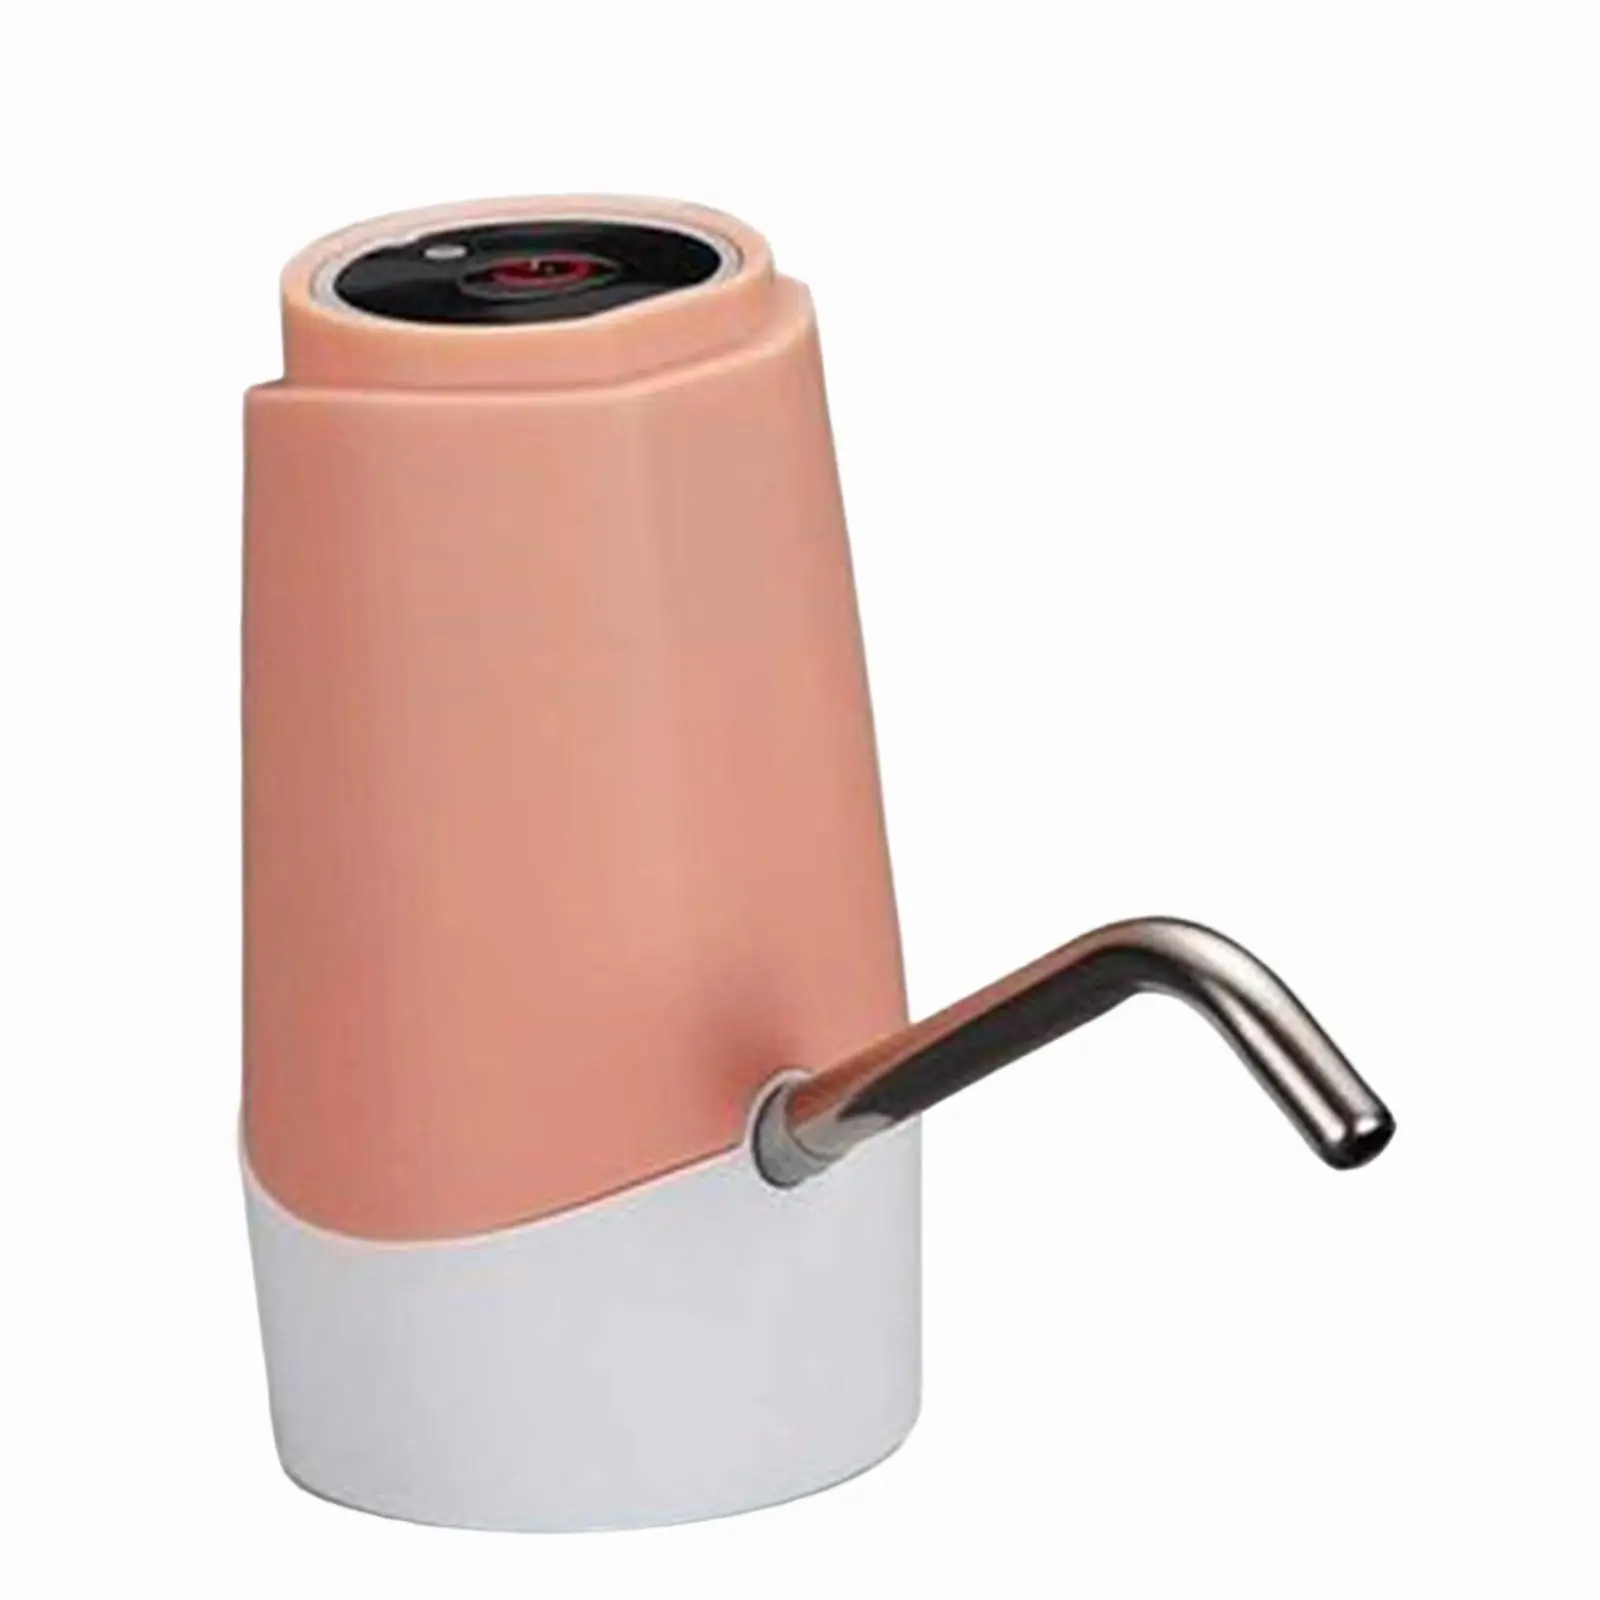 Automatic Water Dispenser, Bucket Water Dispenser Portable Water Pump Electric Pump for Hiking, Picnic, Home, Camping, Kitchen,